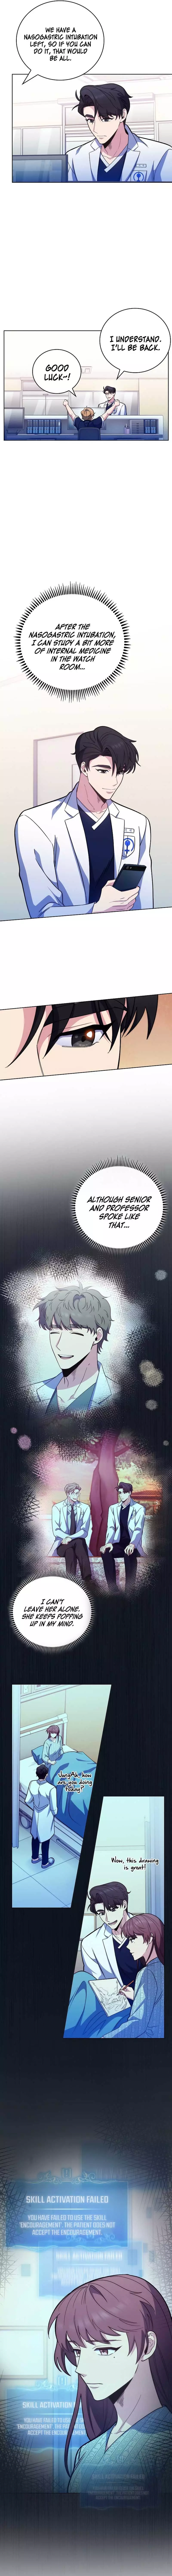 Level-Up Doctor (Manhwa) - 41 page 9-7f4a0725